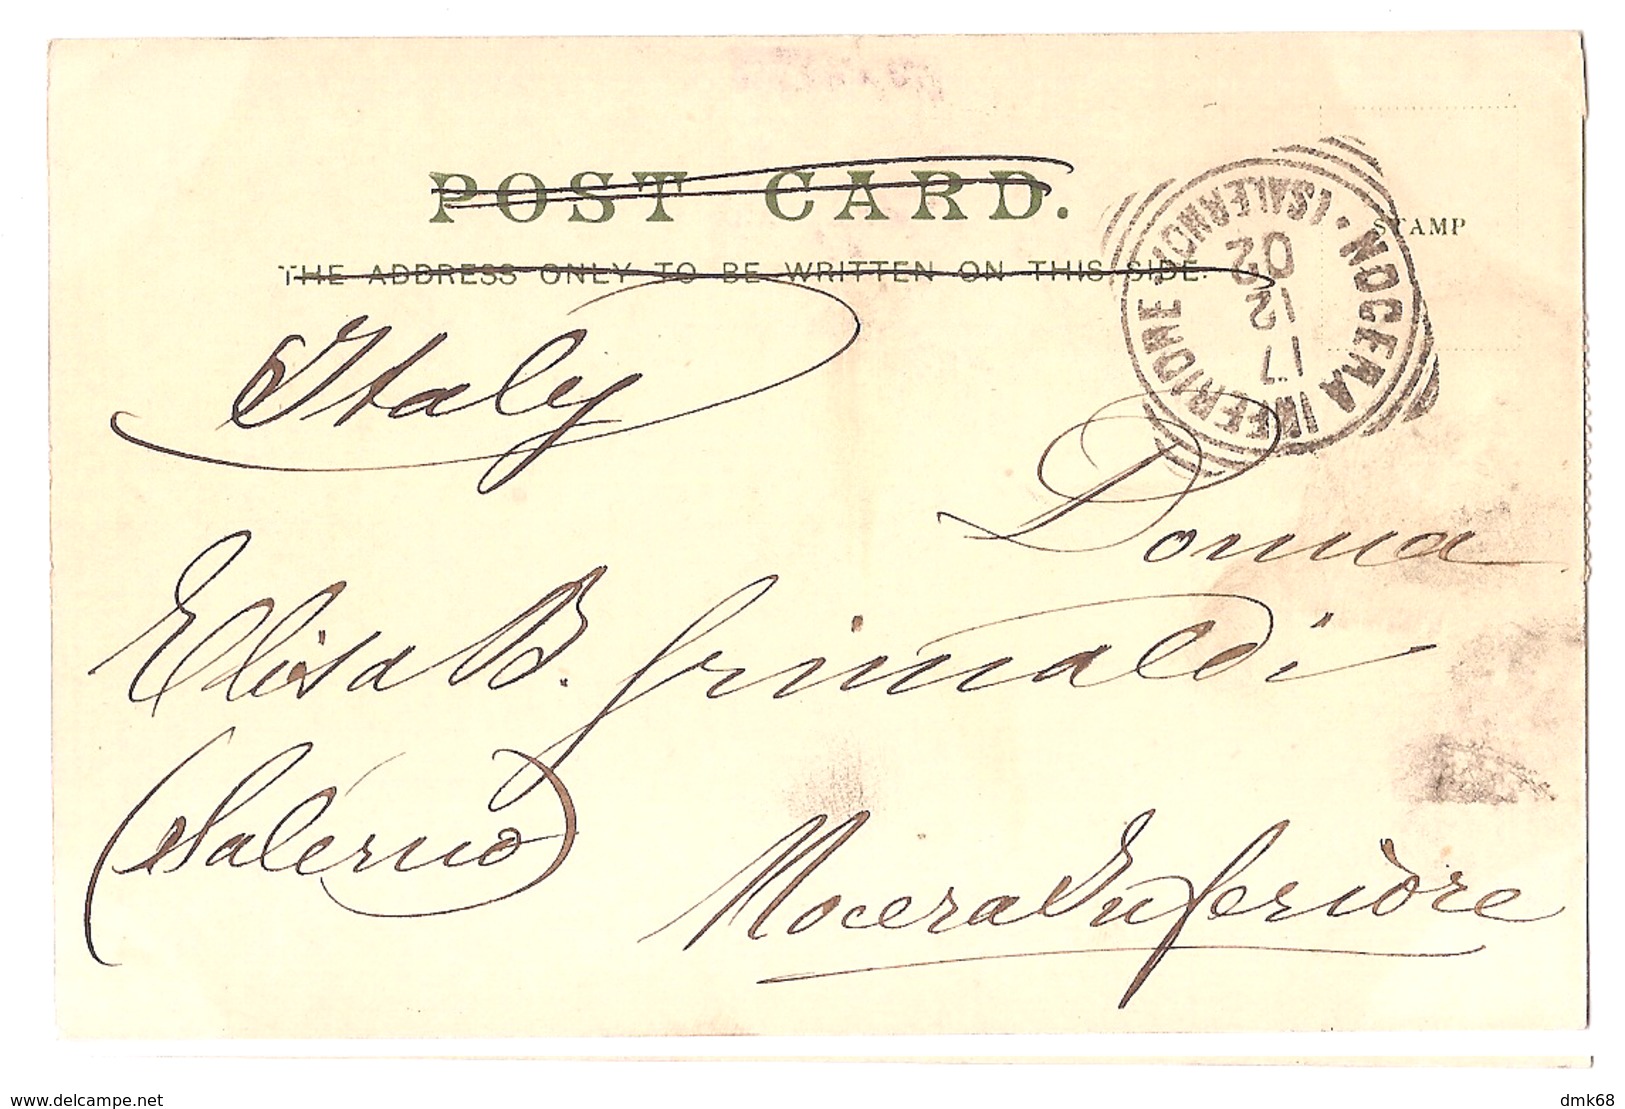 SOUTH AFRICA - PORT ELIZABETH - DONKIN MONUMENT AND RESERVE - STAMP - MAILED TO ITALY 1902 - ( 2782) - Sud Africa